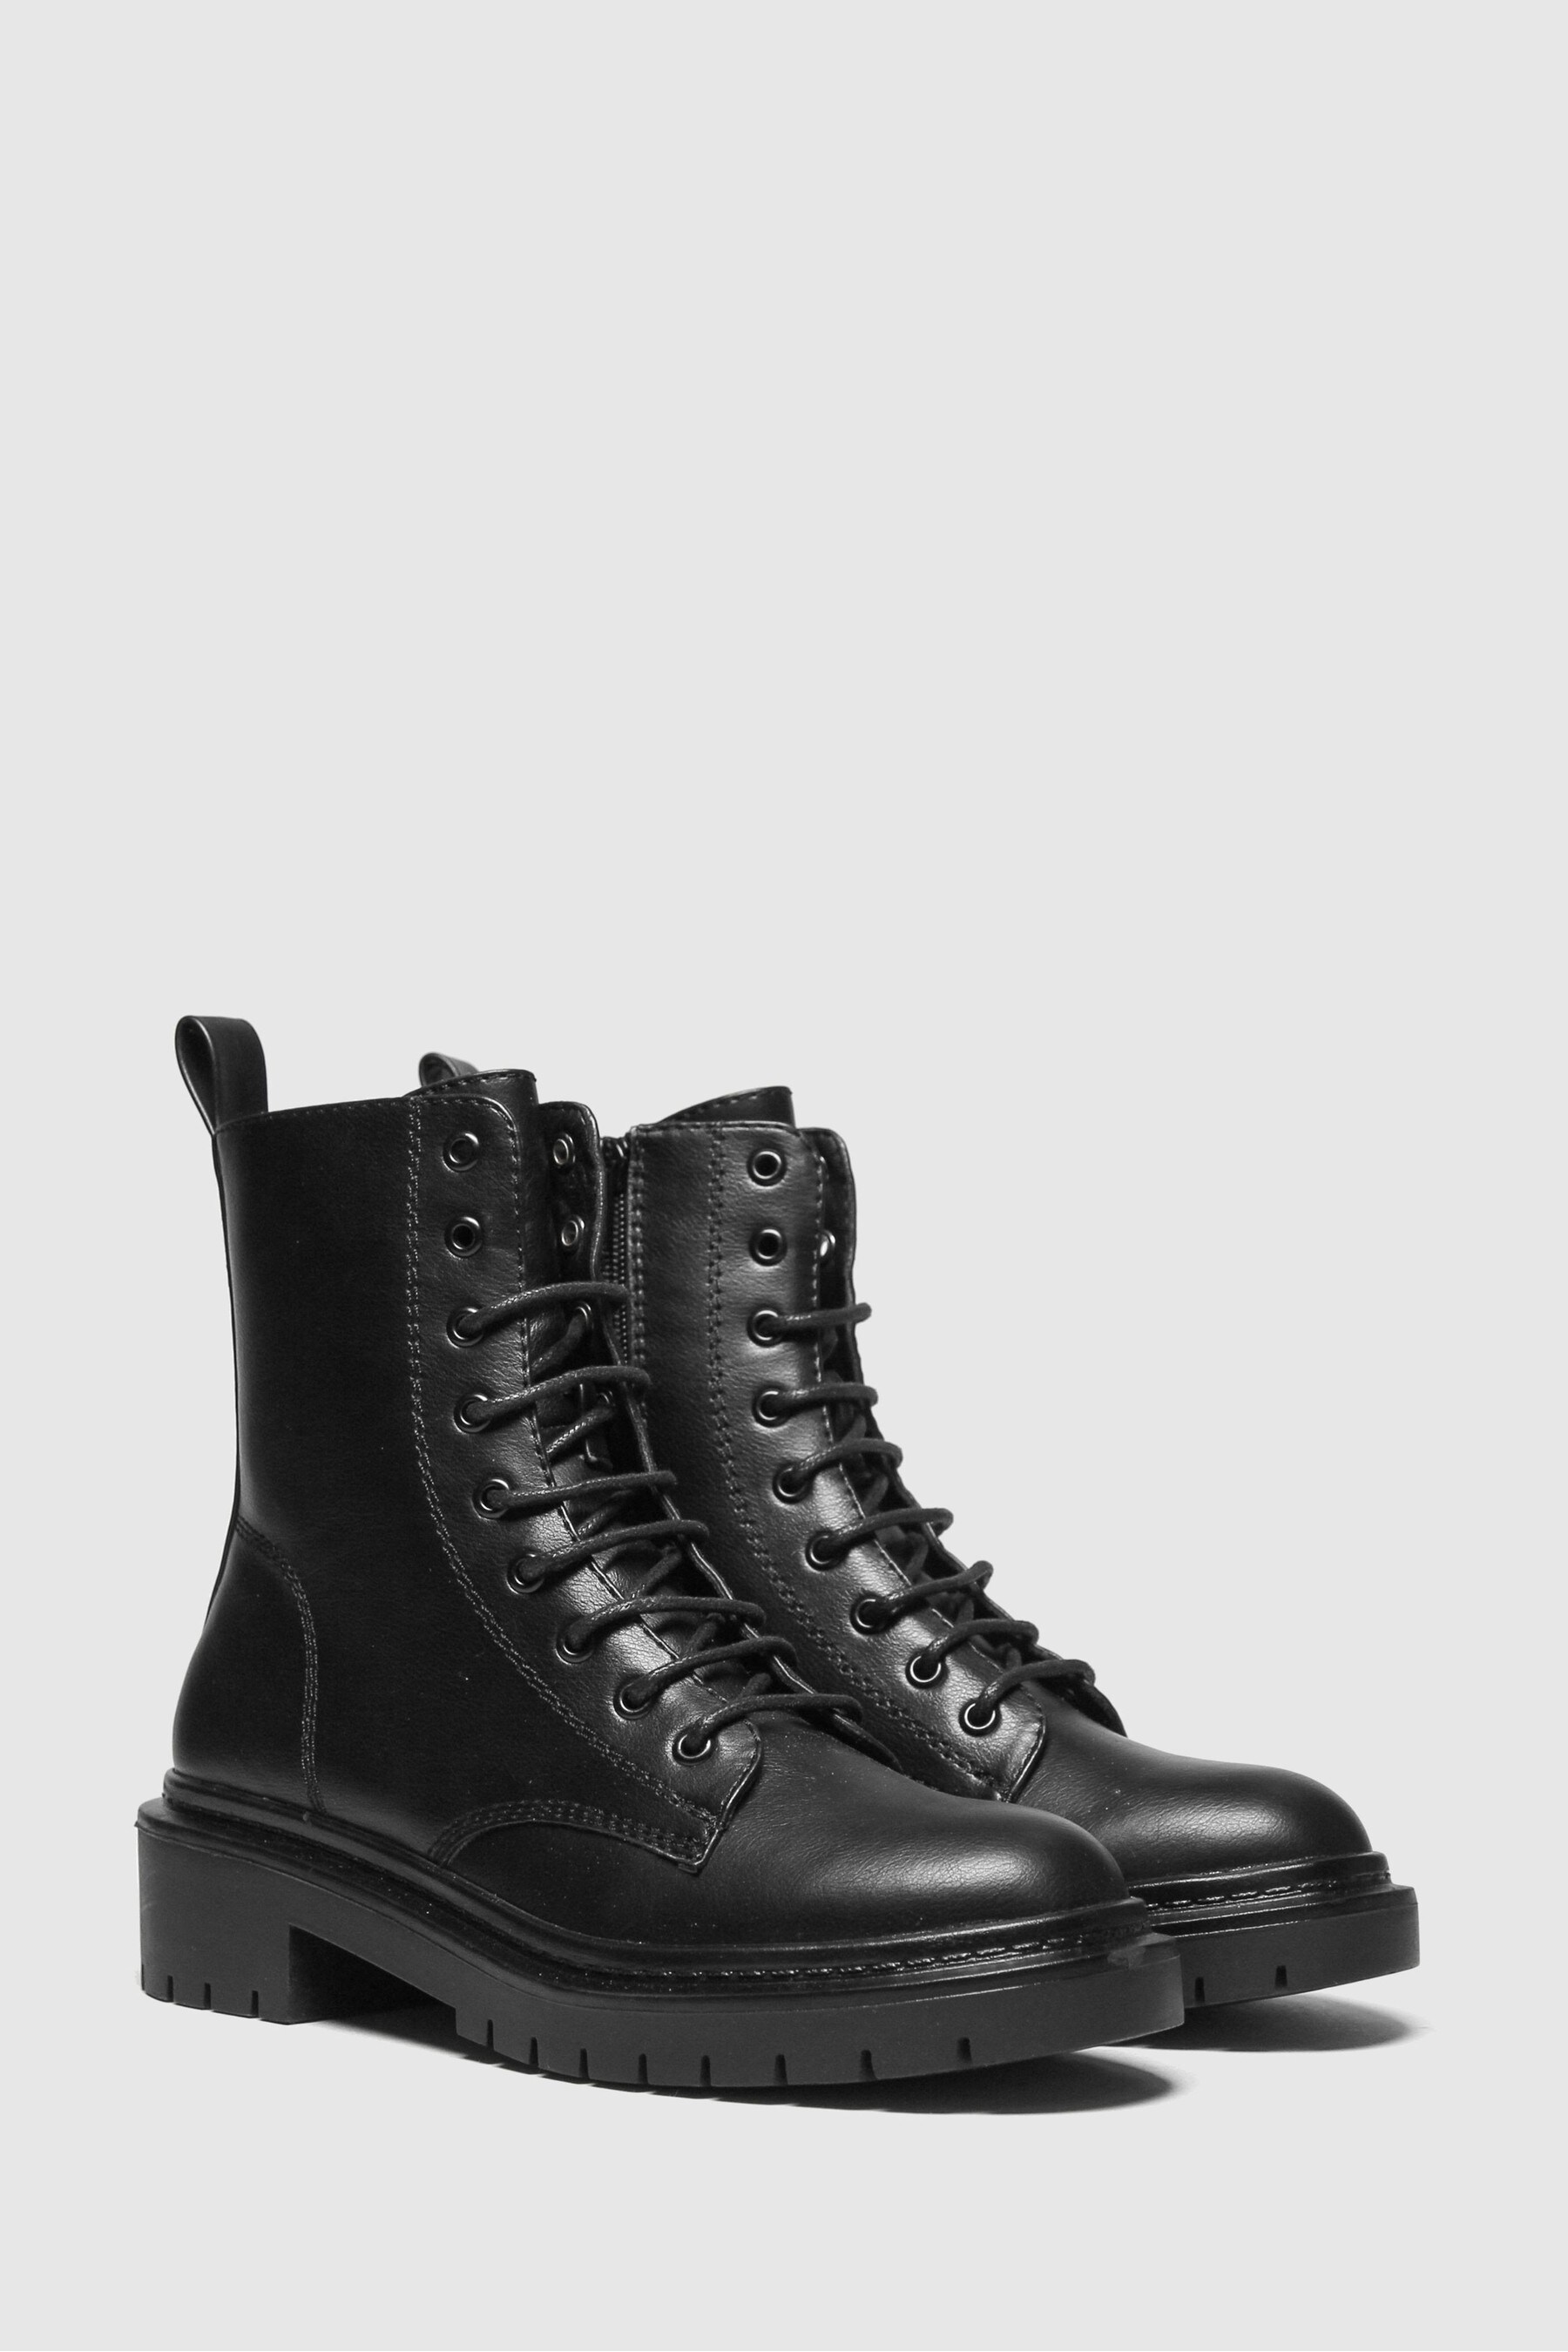 Buy Schuh Black Andy Lace-Up Boots from the Next UK online shop